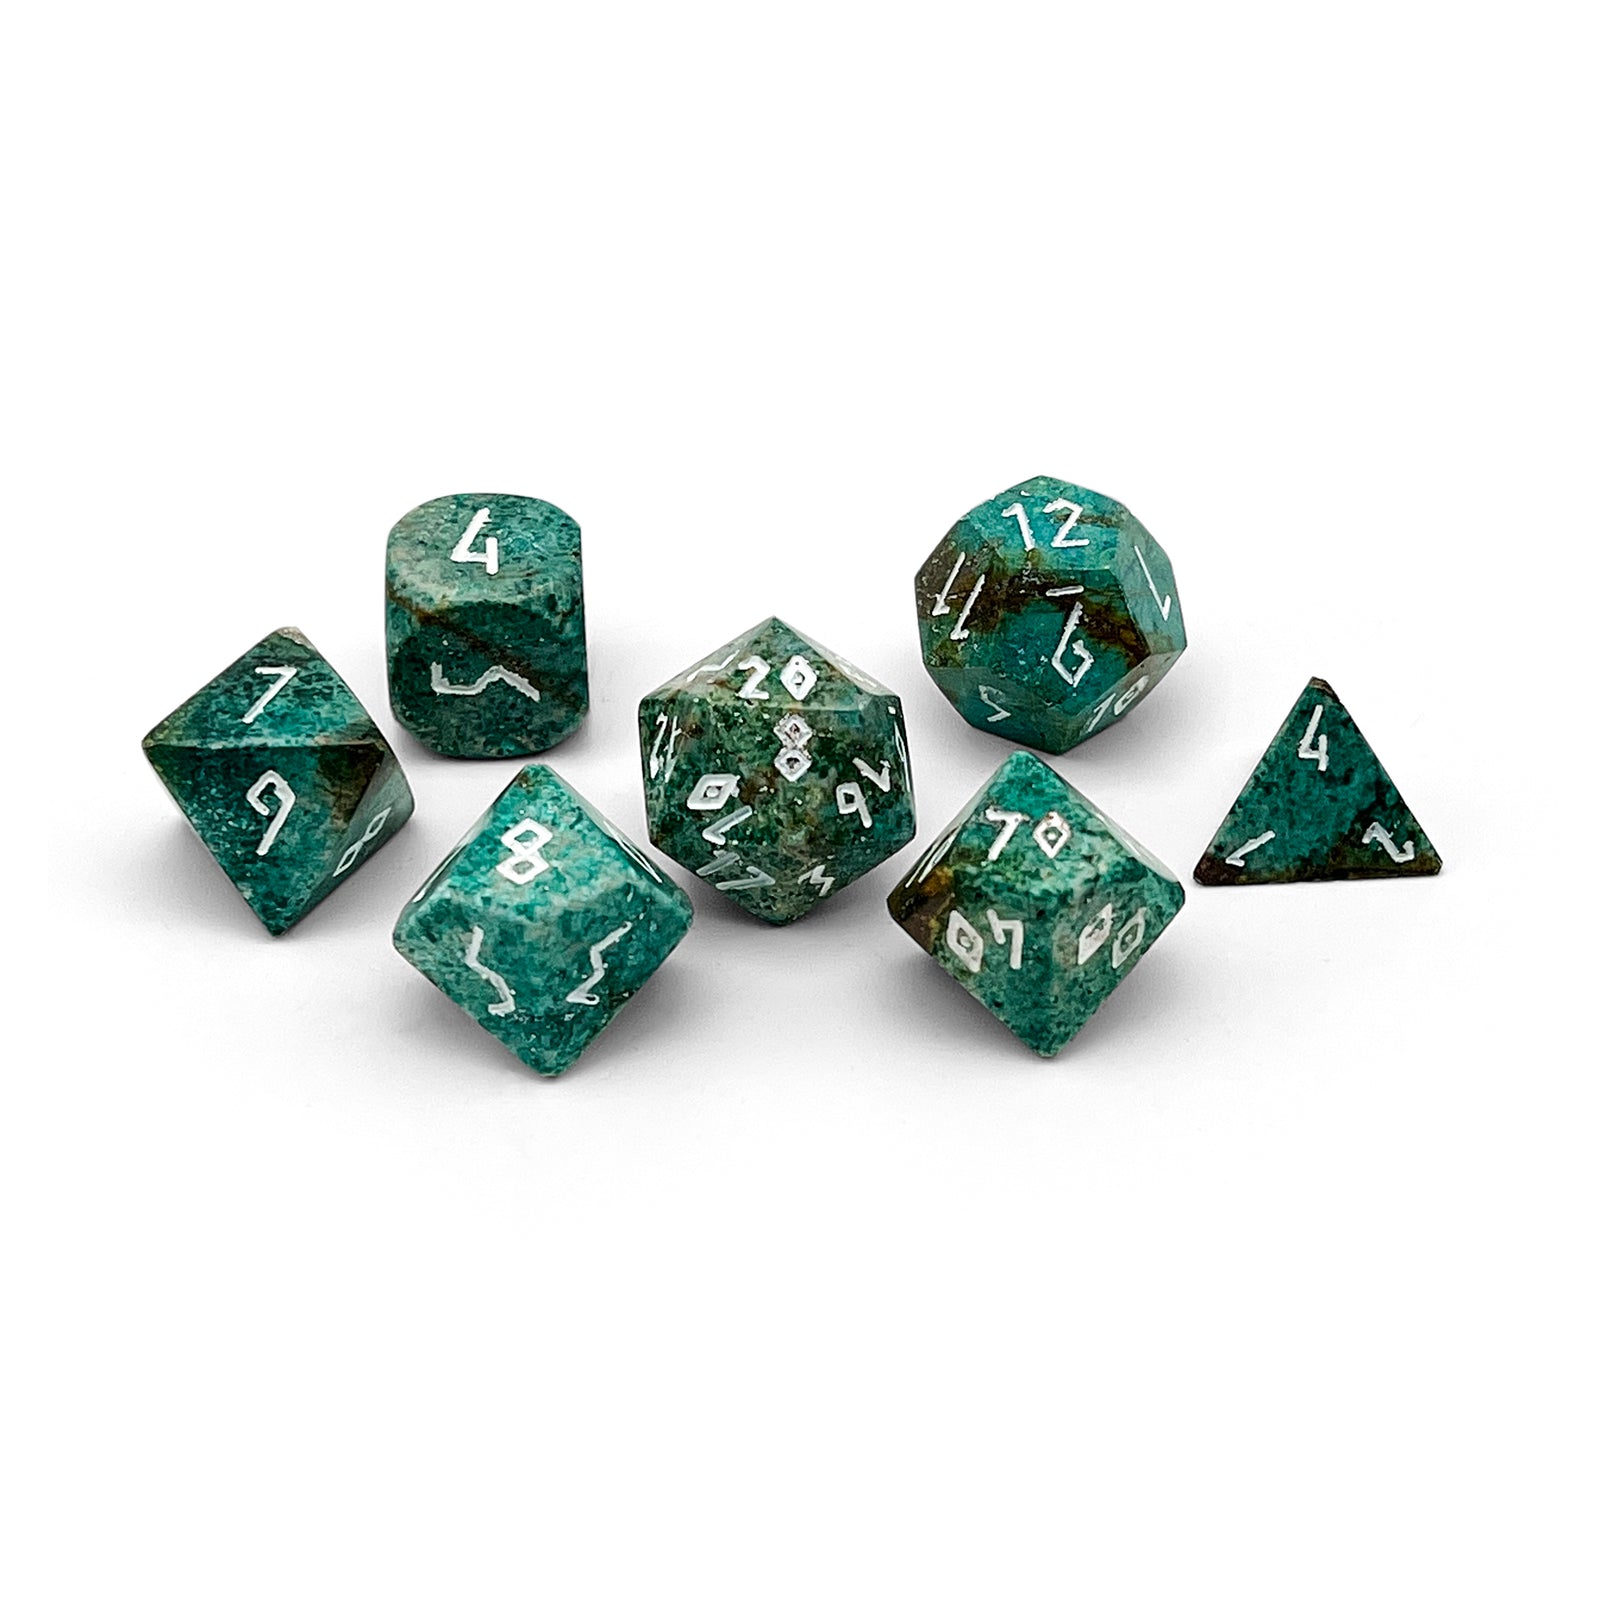 Turquoise Green Coral Fossil - 7 Piece RPG Set Gemstone Dice